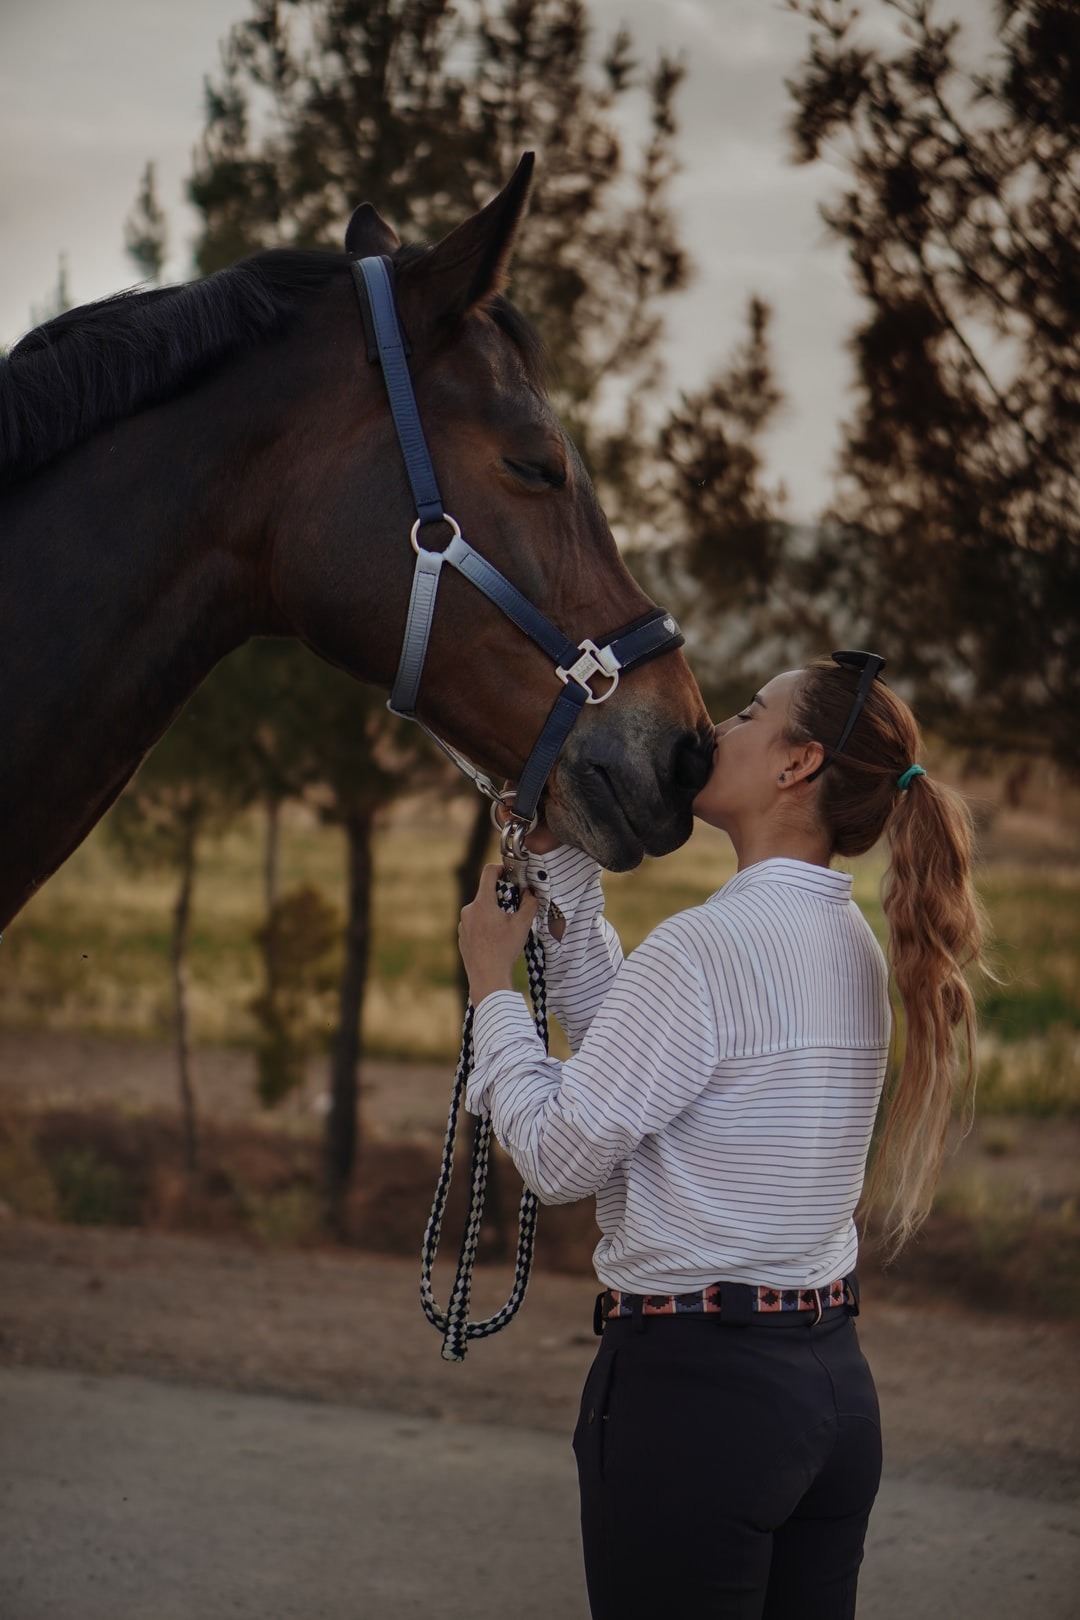 How Does Equine Therapy Work?